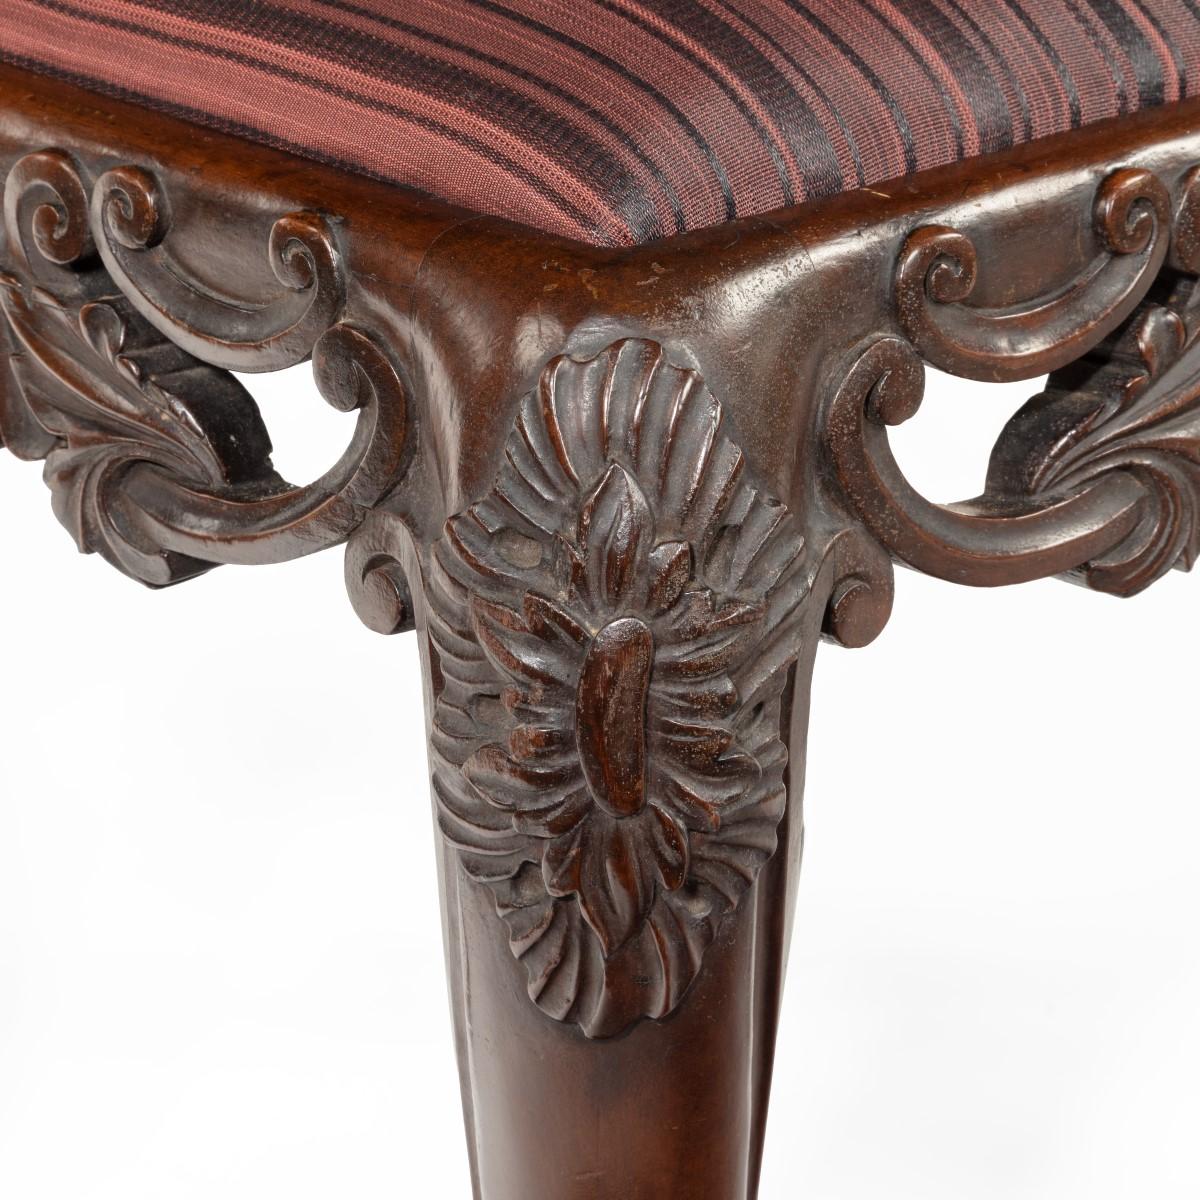 A pair of Victorian carved mahogany stools, each of square form with a pierced frieze and raised on scrolling cabriole legs, the drop-in seats upholstered in woven horsehair. English, circa 1845.